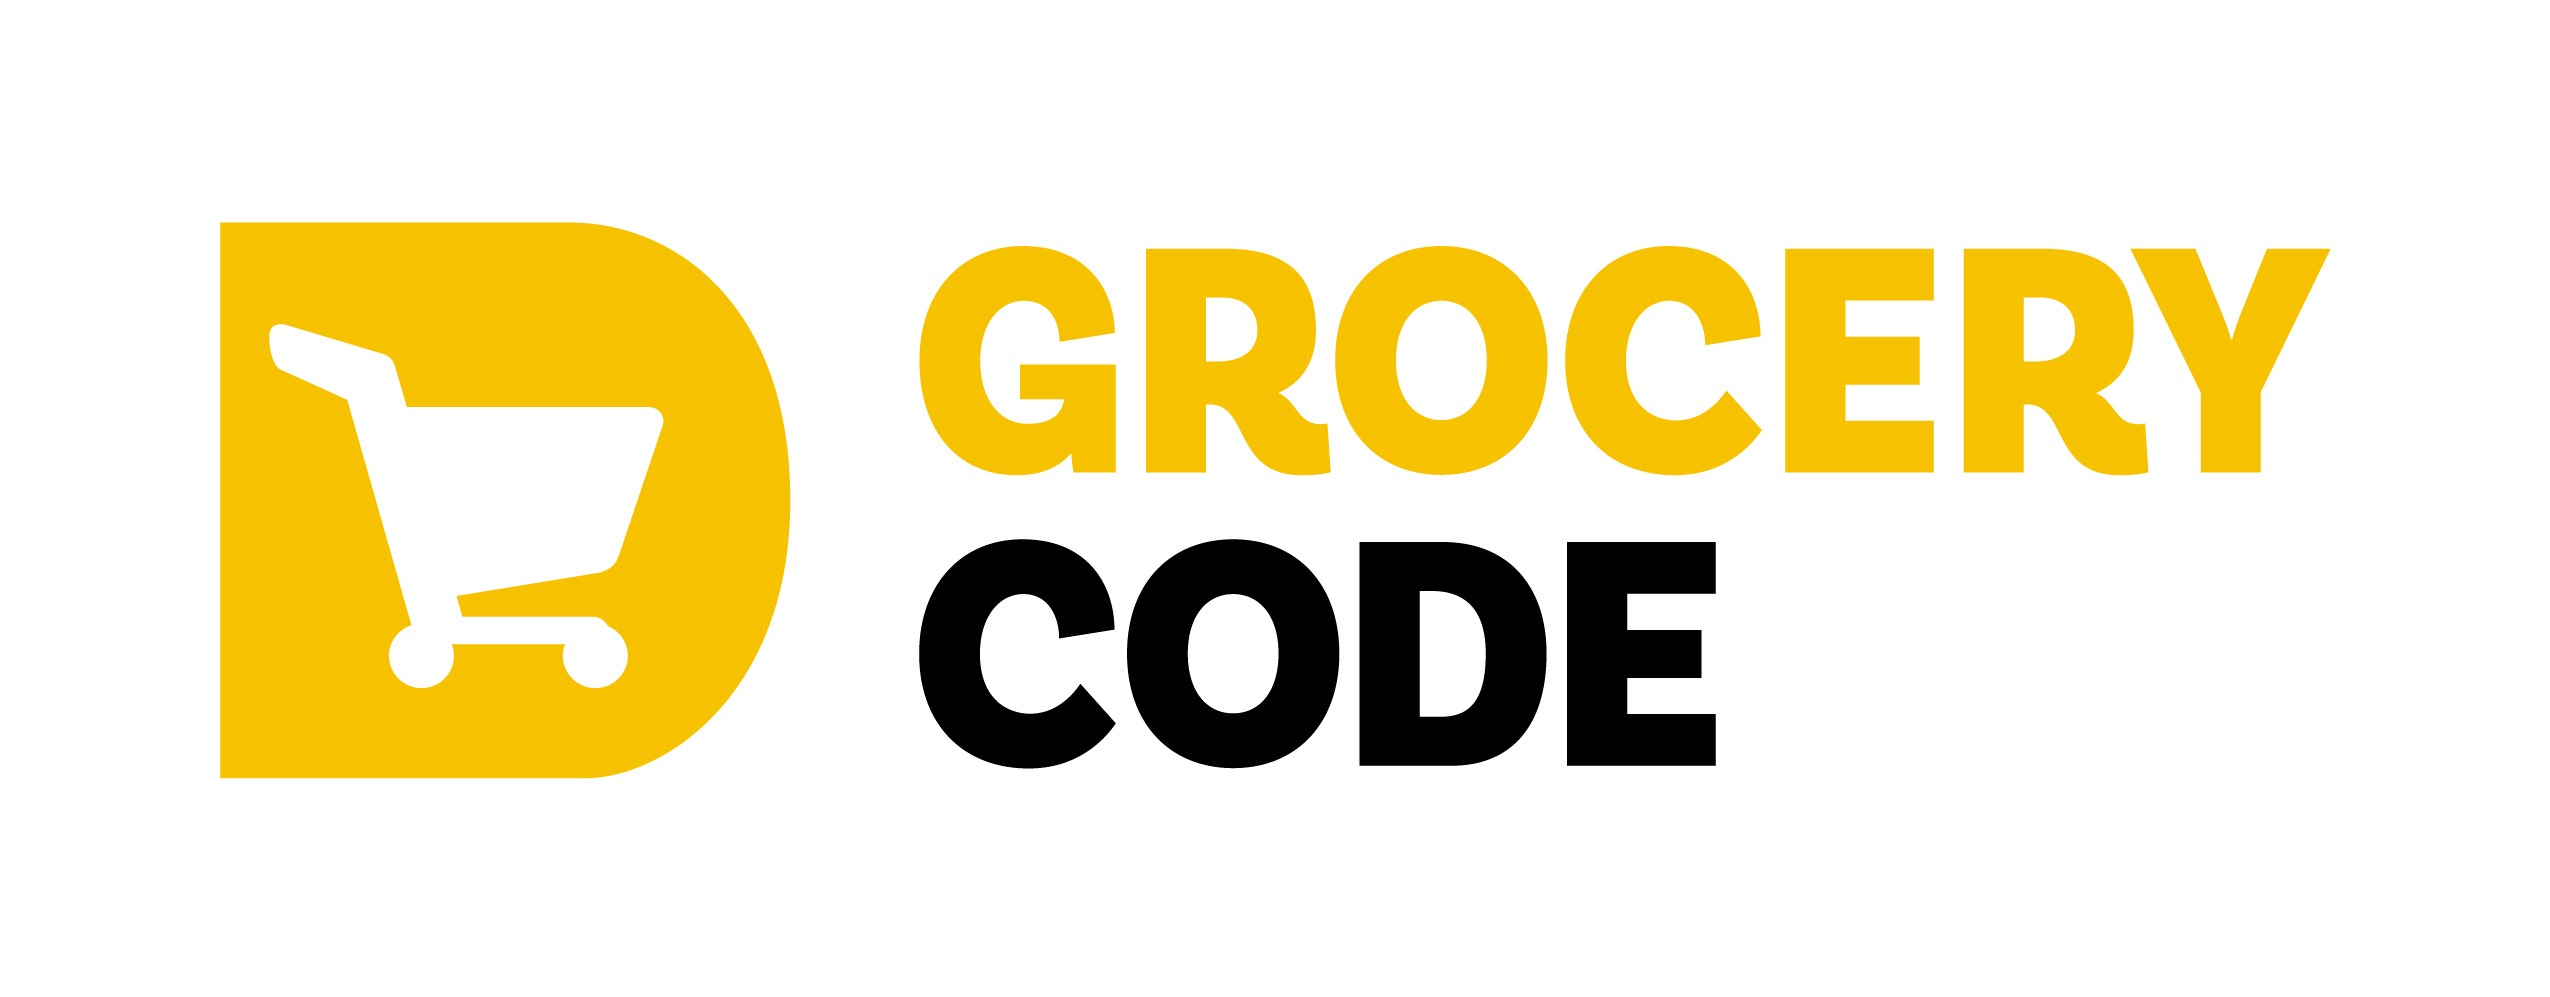 Grocery Code of Conduct logo large